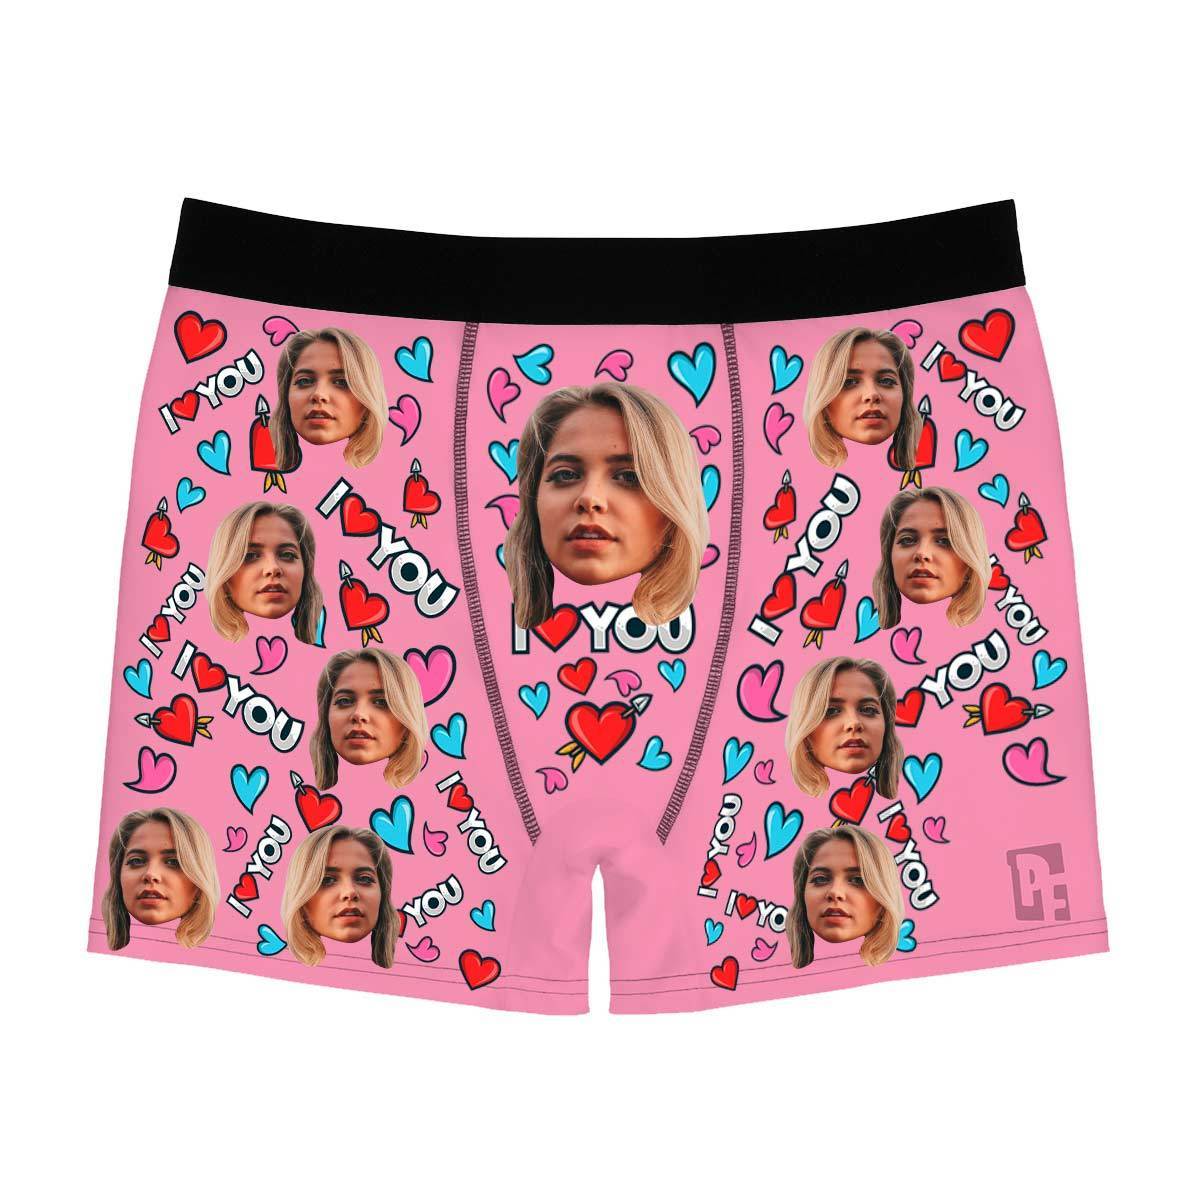 Red Love you men's boxer briefs personalized with photo printed on them